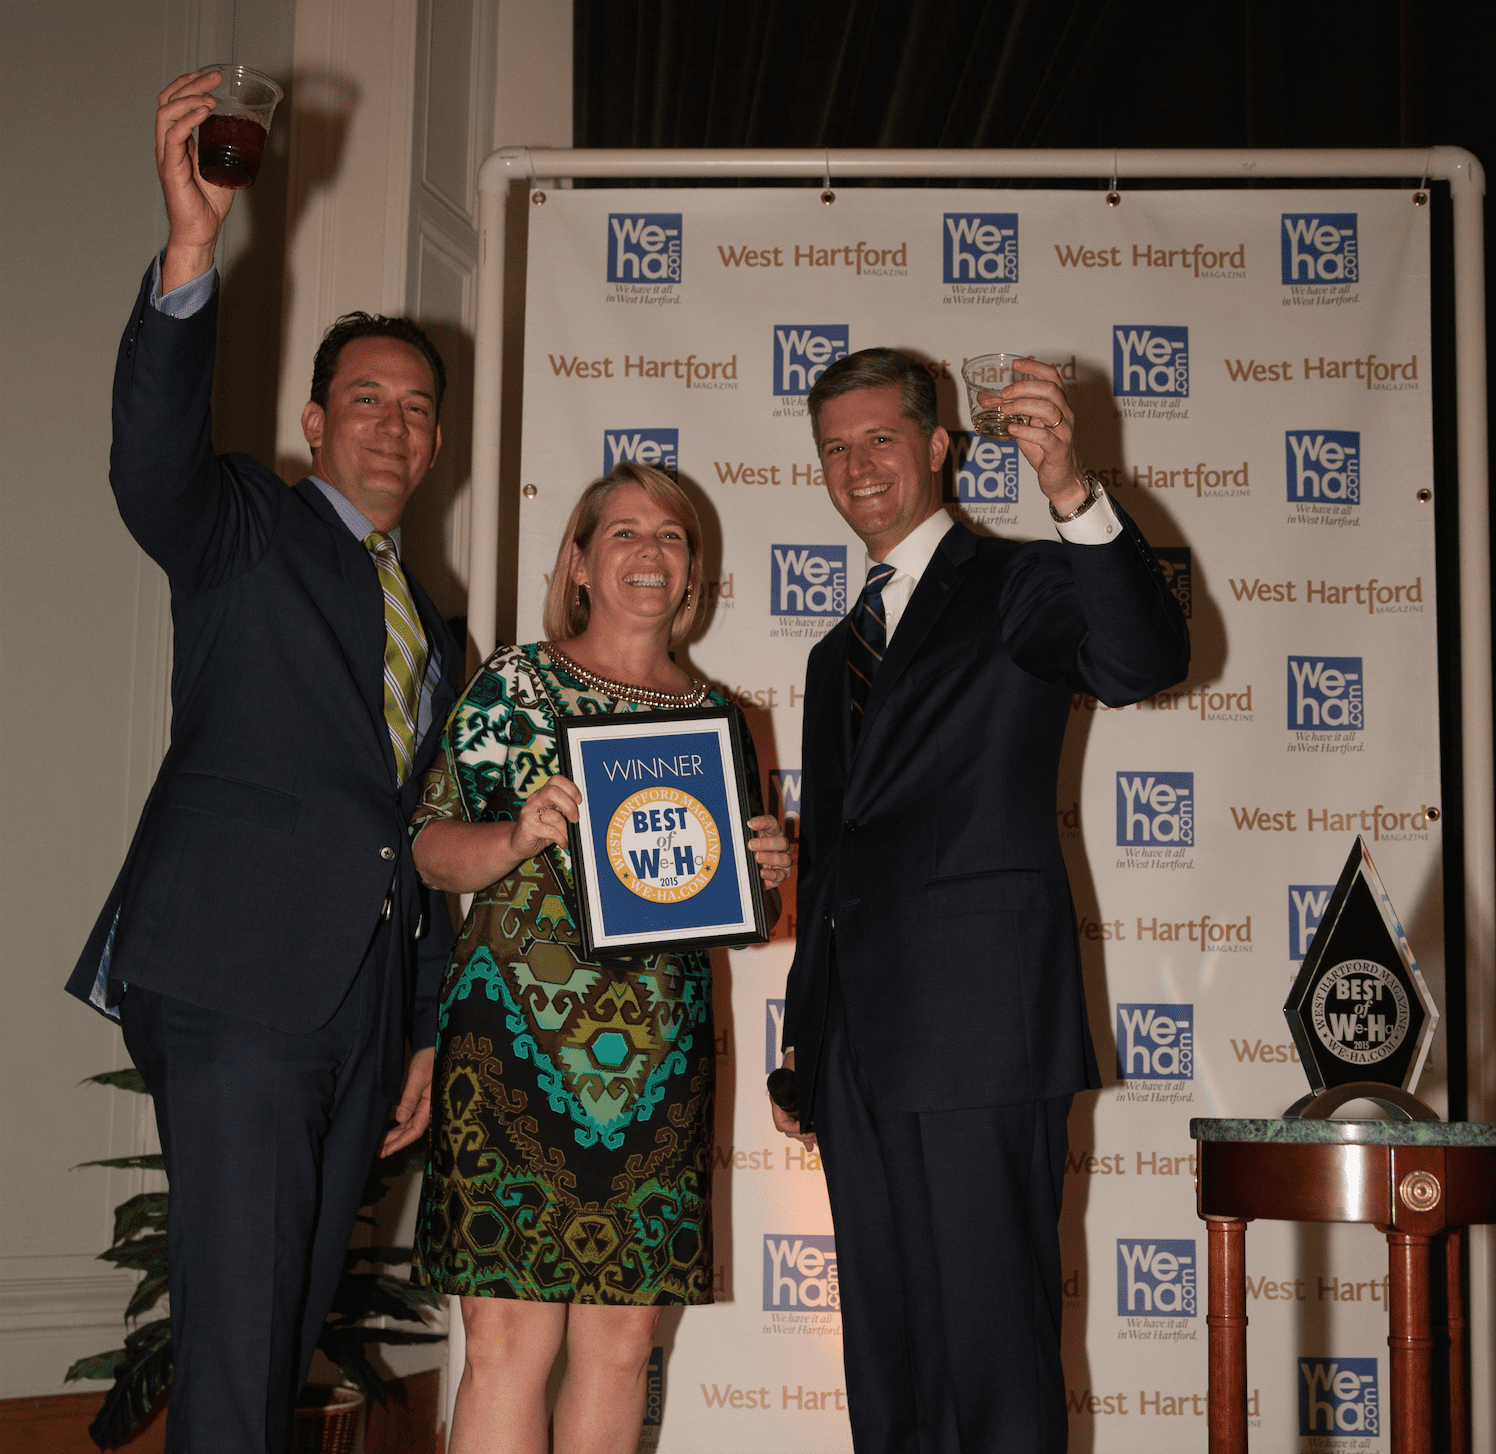 "Cheers" to the Best Tavern: Plan B by NBC Connecticut's Brad Drazen and Mayor Scott Slifka with Park Road Business Association Co-President Tracy Flater at the Best of West Hartford Awards Show, September 10 2015. Photo by Mick Melvin